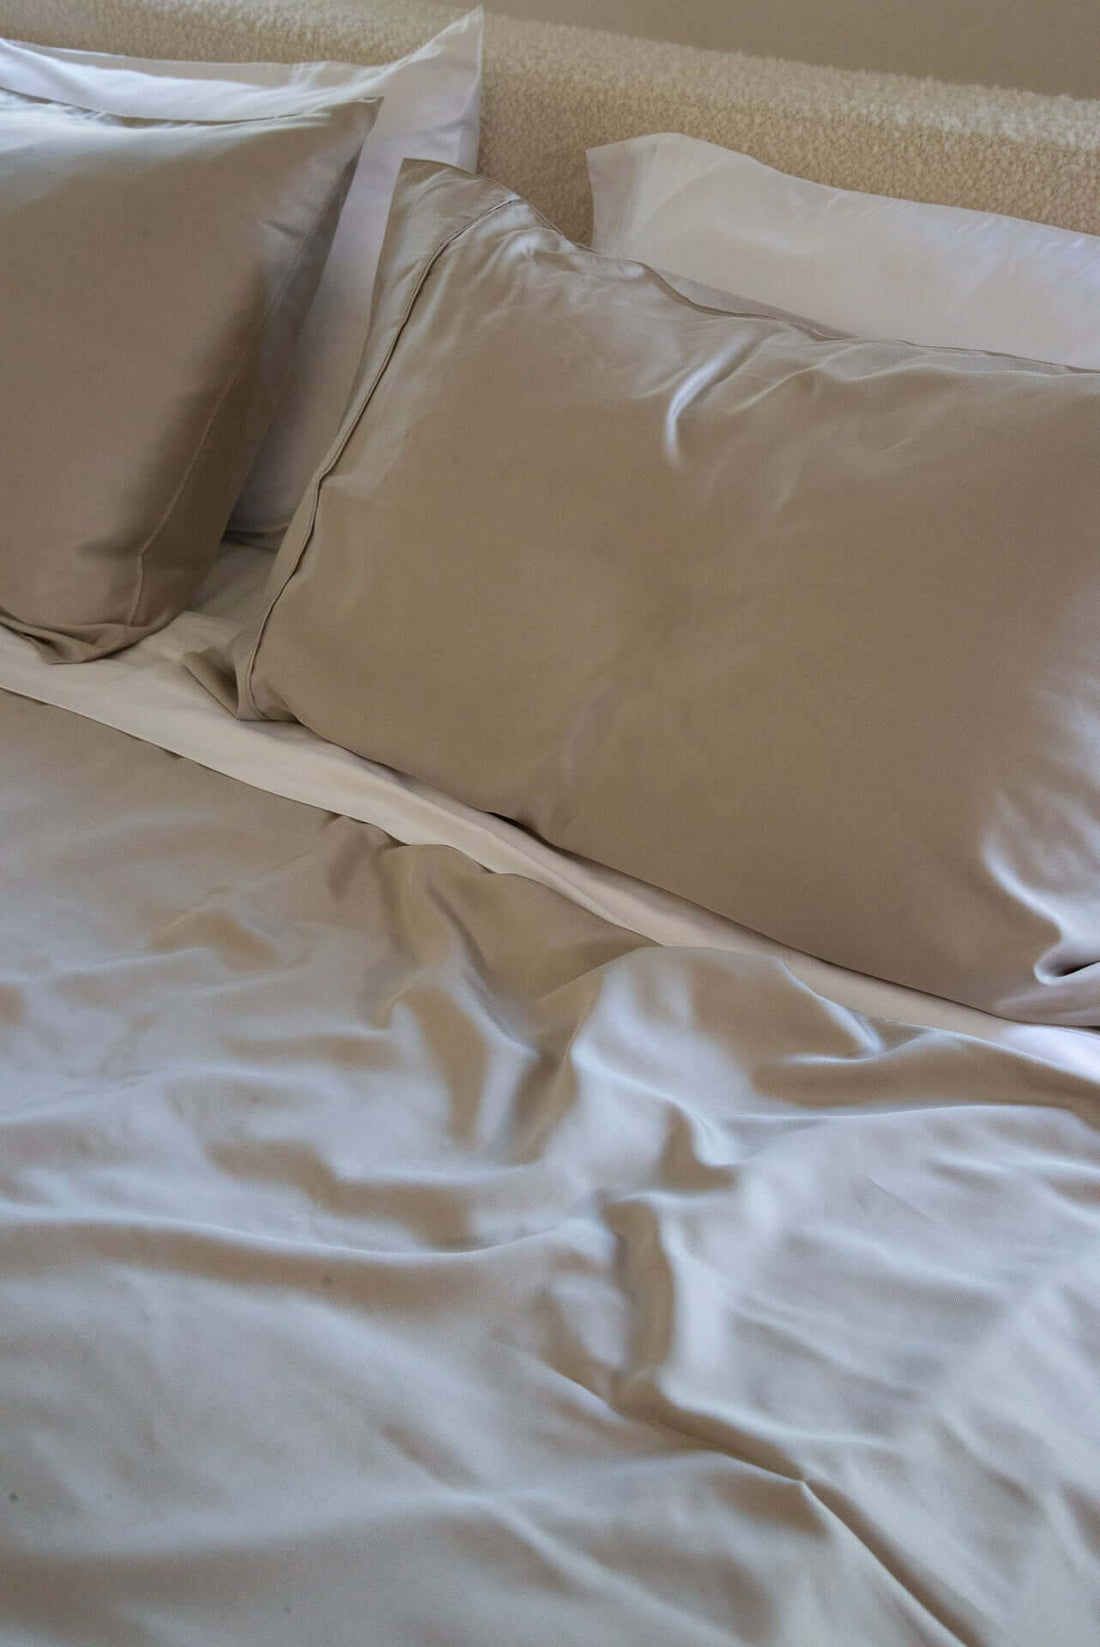 Can Hypoallergenic Sheets Improve Sleep Quality?